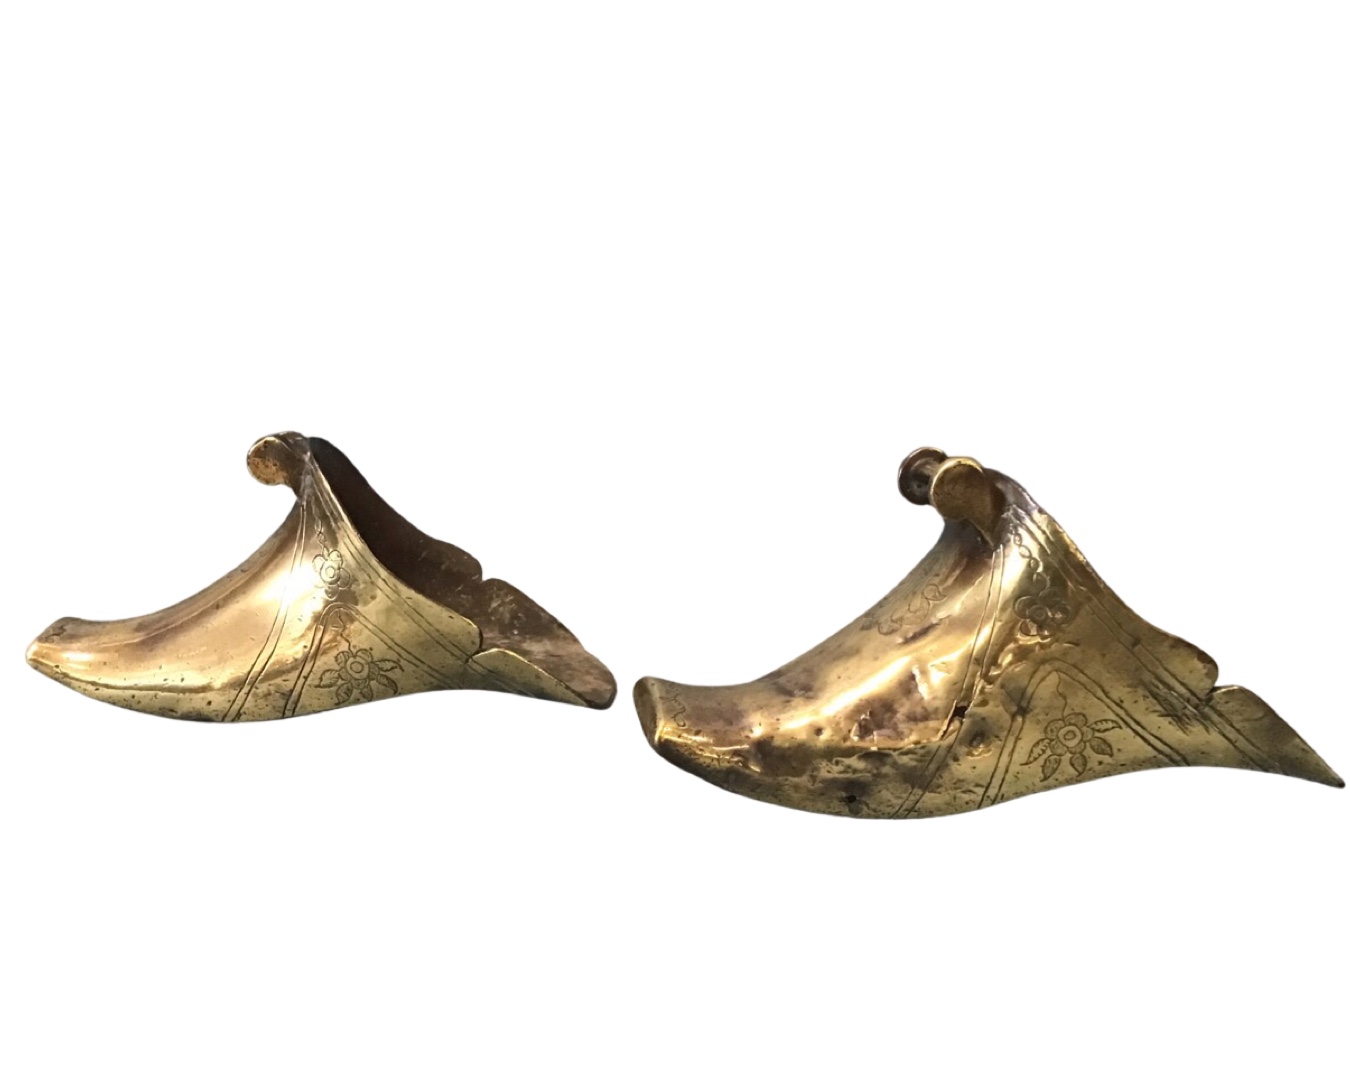 A pair of antique brass slipper stirrups, probably Spanish with floral engraved decoration, the